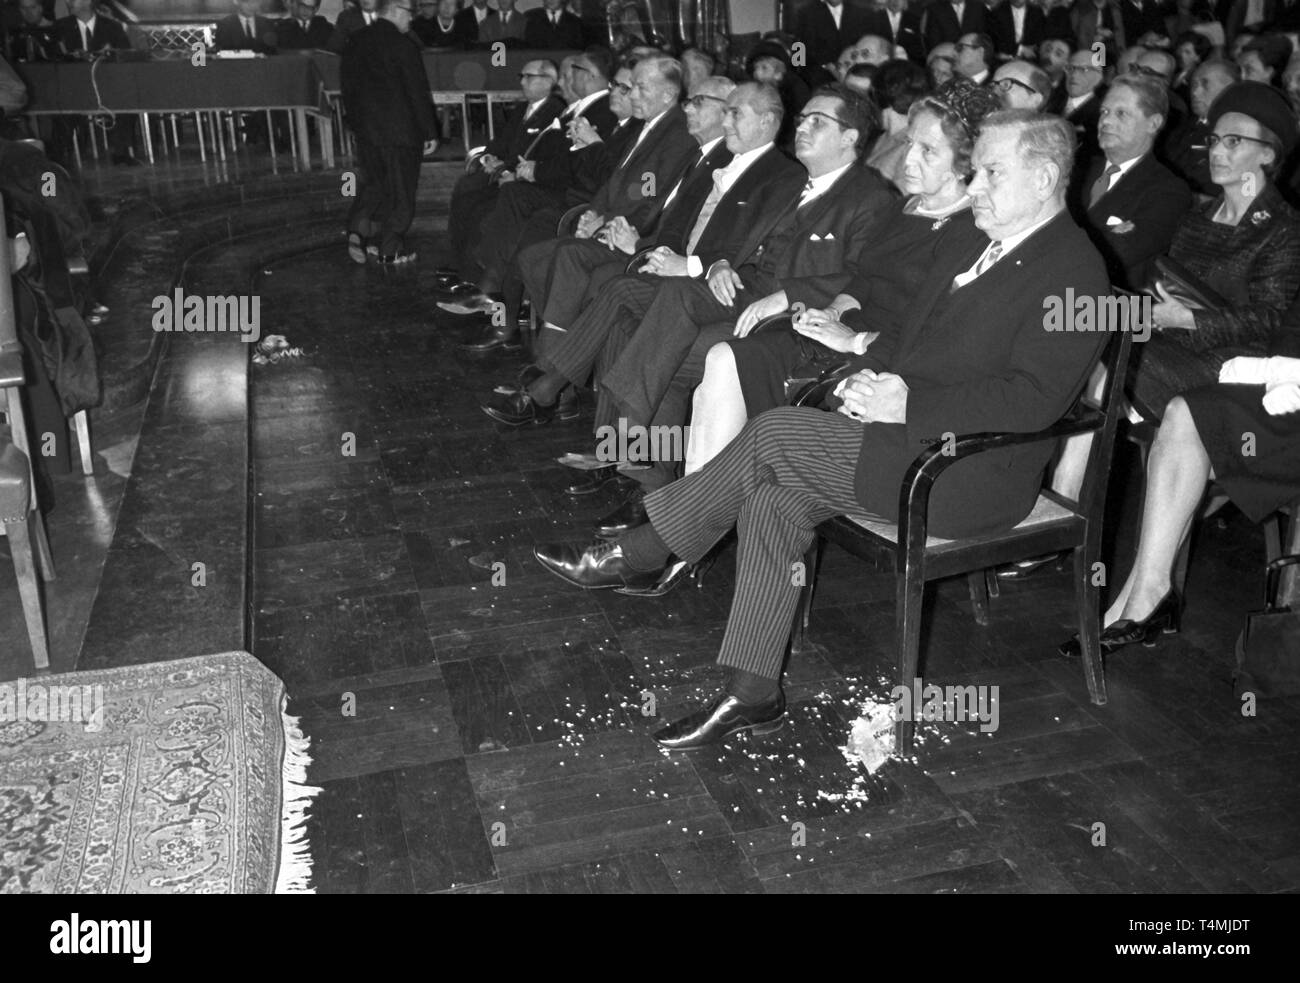 Students disturb the rectorship ceremony on 25 November 1967 in the Auditorium Maximum of Munich University by throwing confetti onto the honorary guests (front row, from right) minister president of Bavaria Alfons Goppel, his wife Gertrud Goppel and Bavarian minister of education Ludwig Huber. | usage worldwide Stock Photo